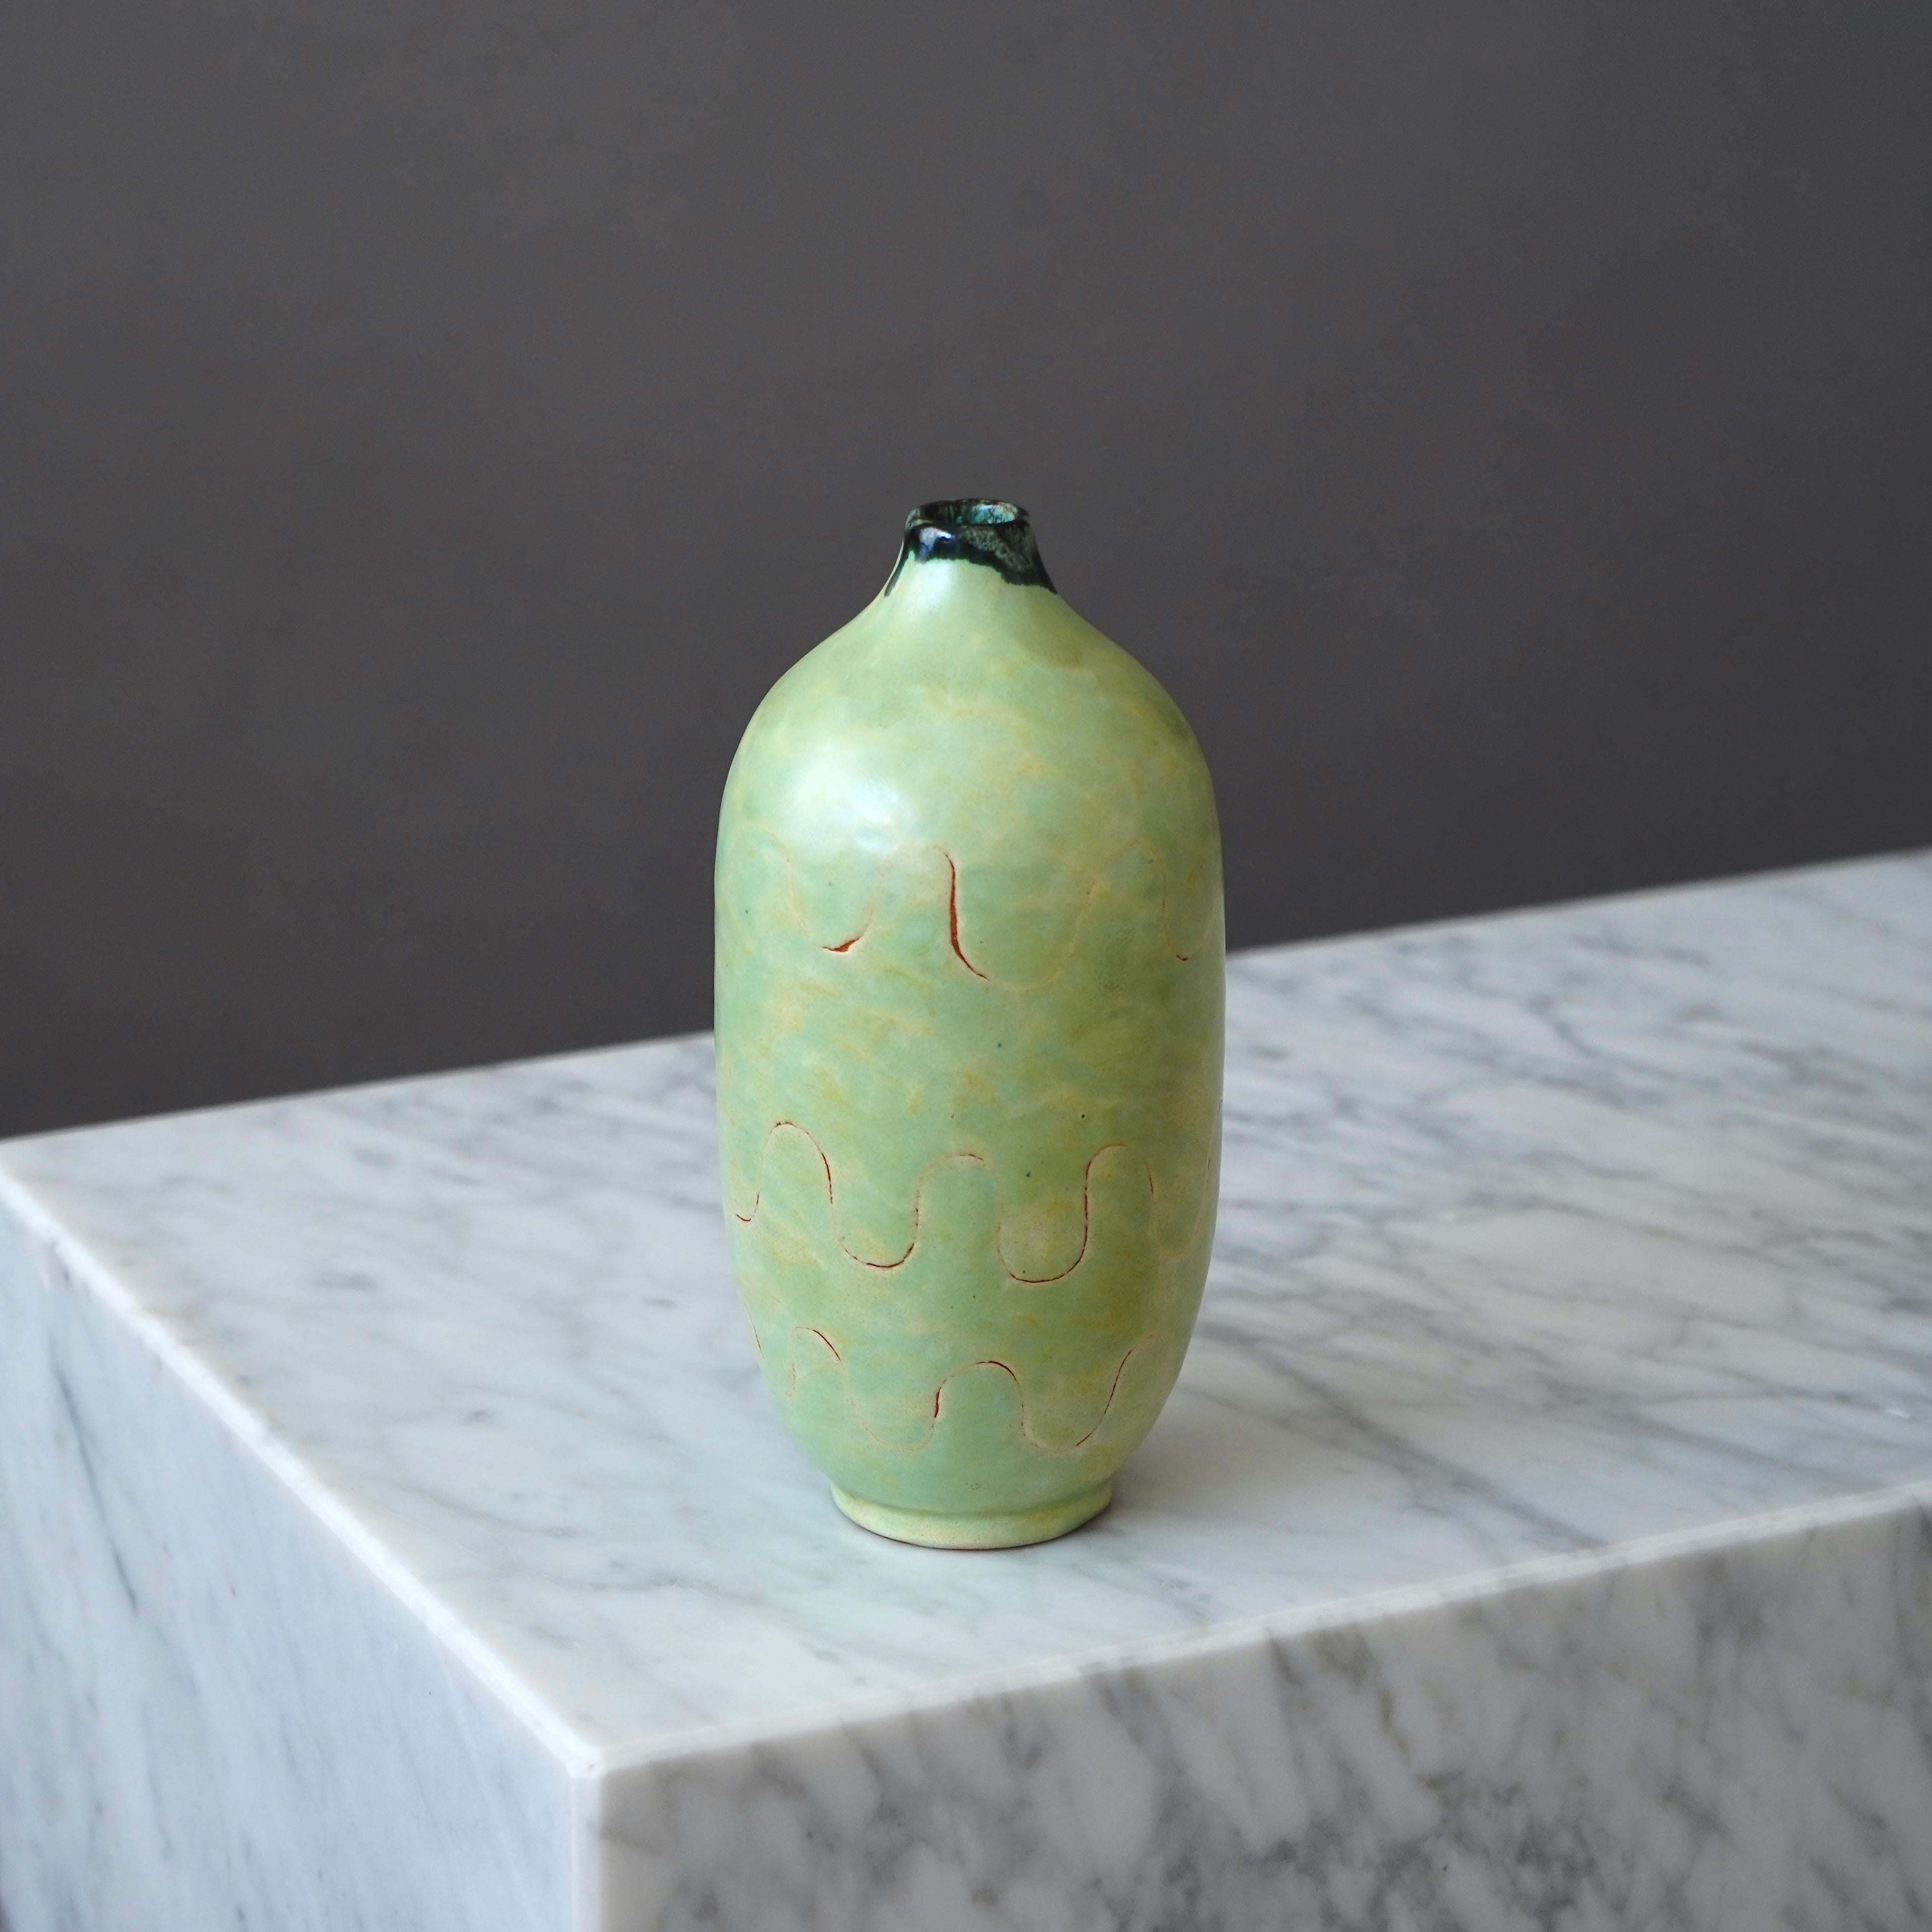 A unique and beautiful vase with amazing green glaze.
Designed by Anna-Lisa Thomson for Upsala Ekeby, Sweden, 1940s.

Excellent condition. 
Impressed 'EKEBY'.

Anna-Lisa Thomson (1905-1952) was born in the southern Sweden town of Karlskrona. She